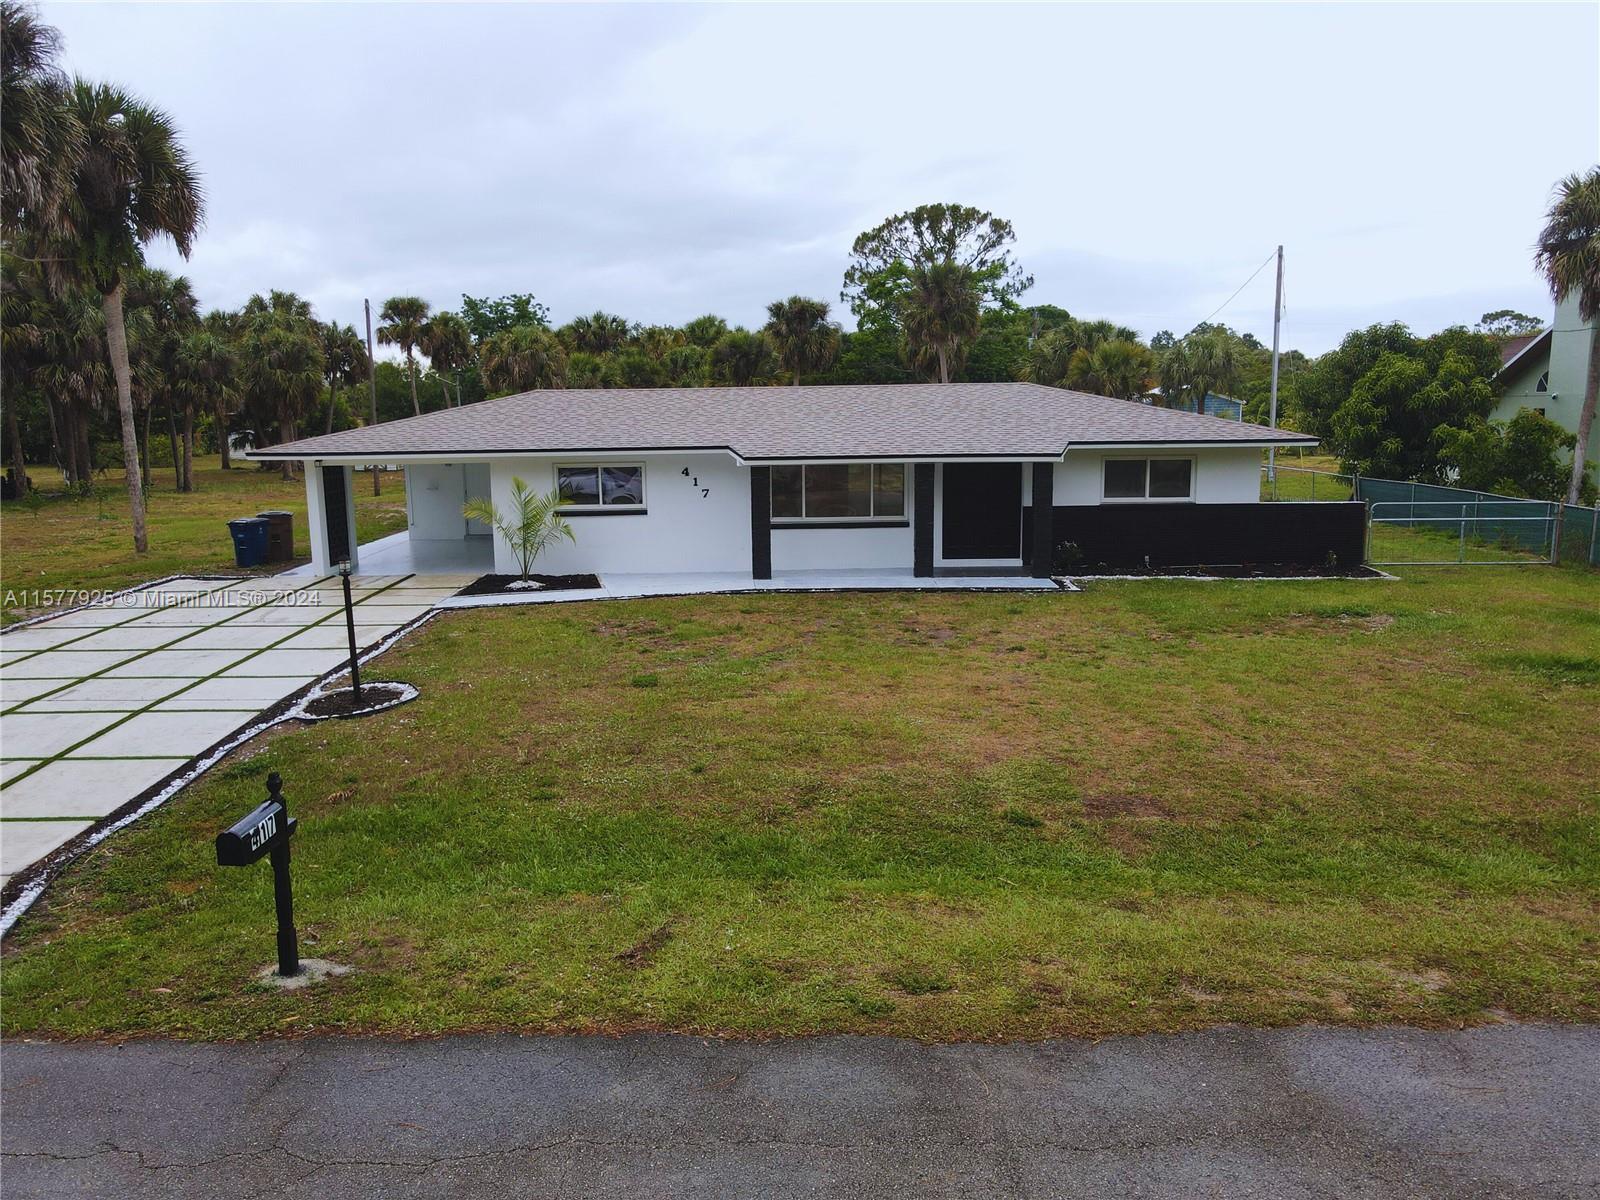 Photo of 417 Roosevelt Ave in Lehigh Acres, FL